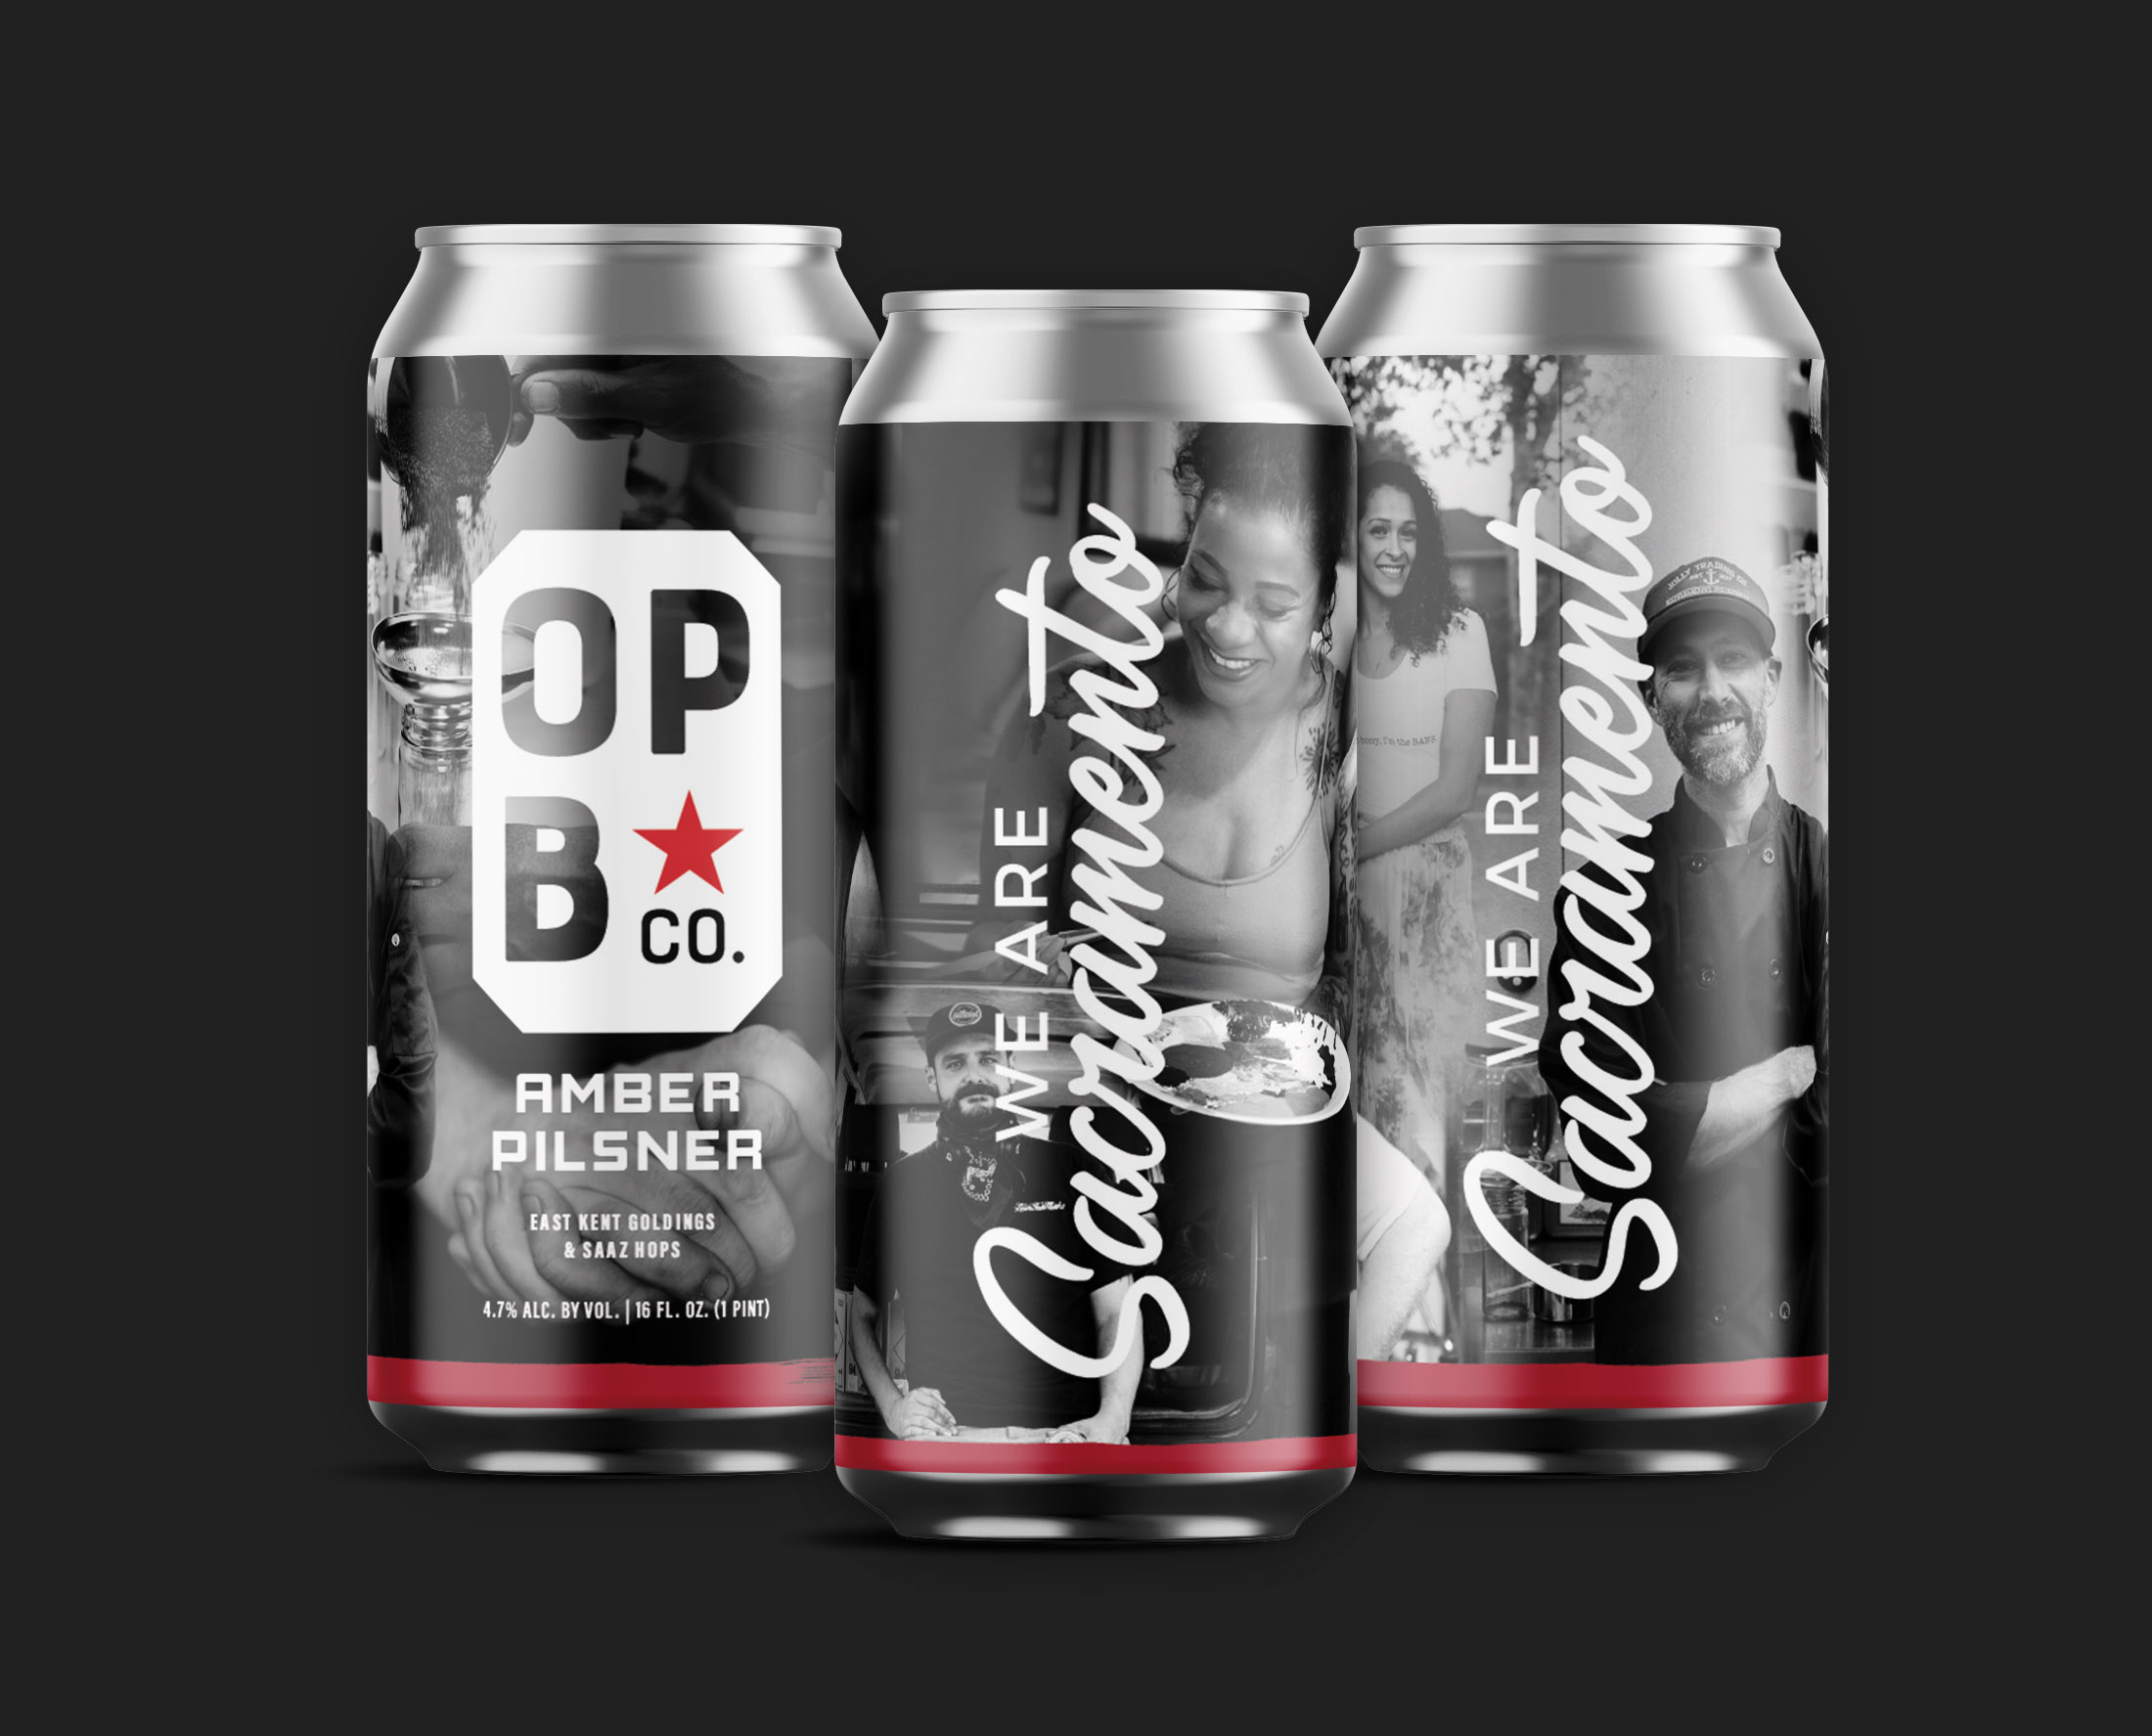 digital rendering of the We are Sacramento beer. 3 cans featuring portraits of locals and OPB logo